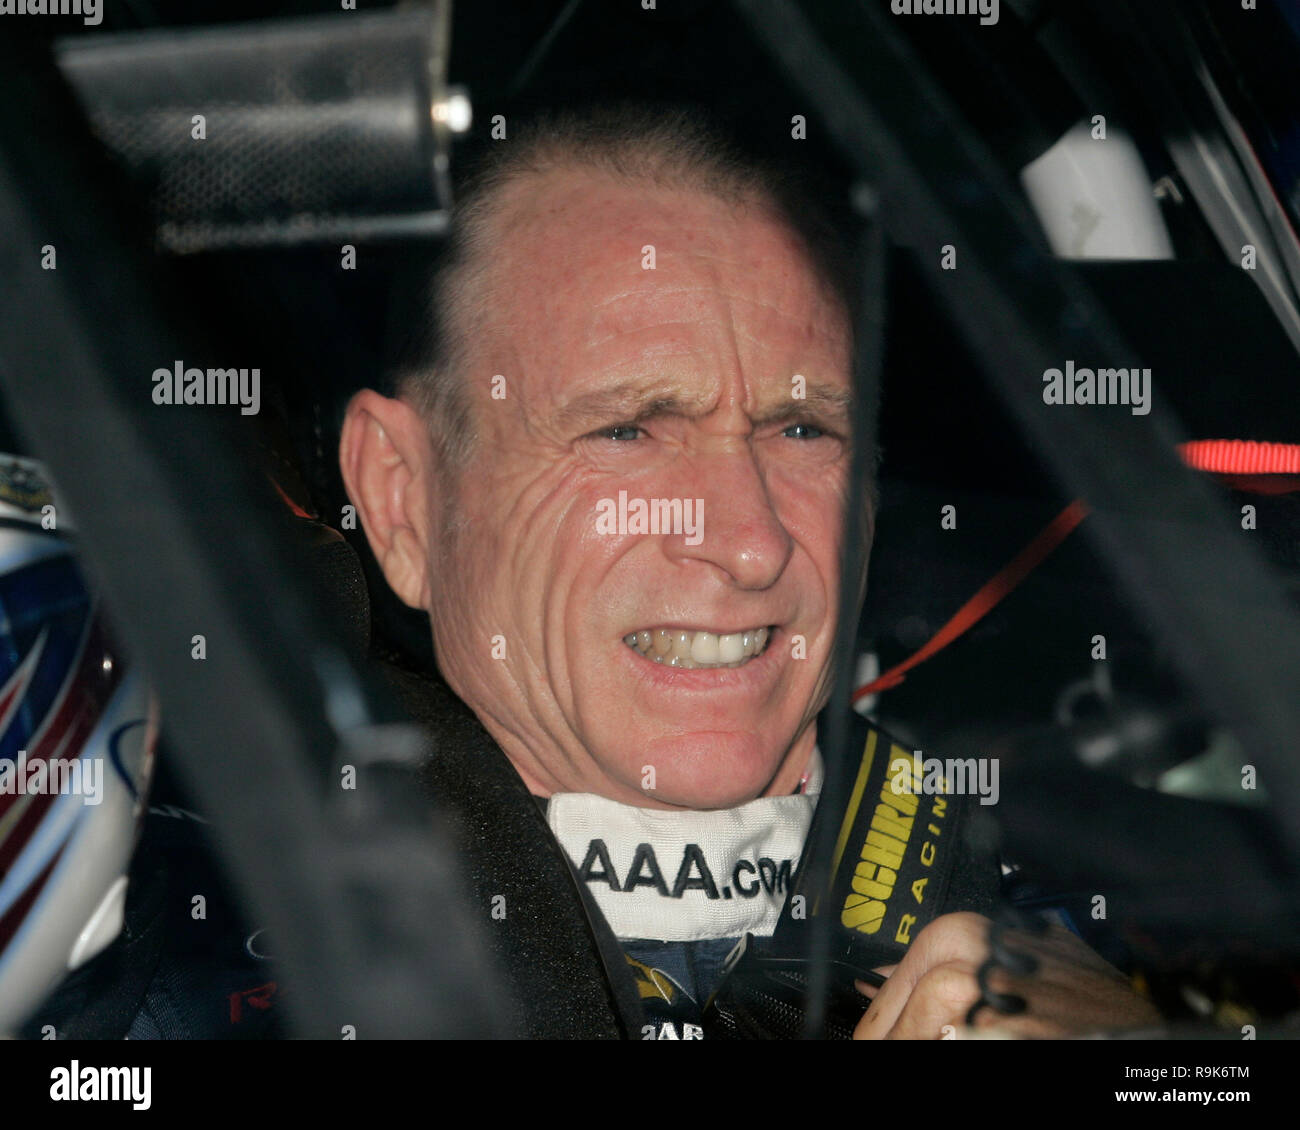 Mark Martin waits in his car for the Nextel Cup Practice to begin at Homestead-Miami Speedway in Homestead, Florida on November 18, 2006. Stock Photo